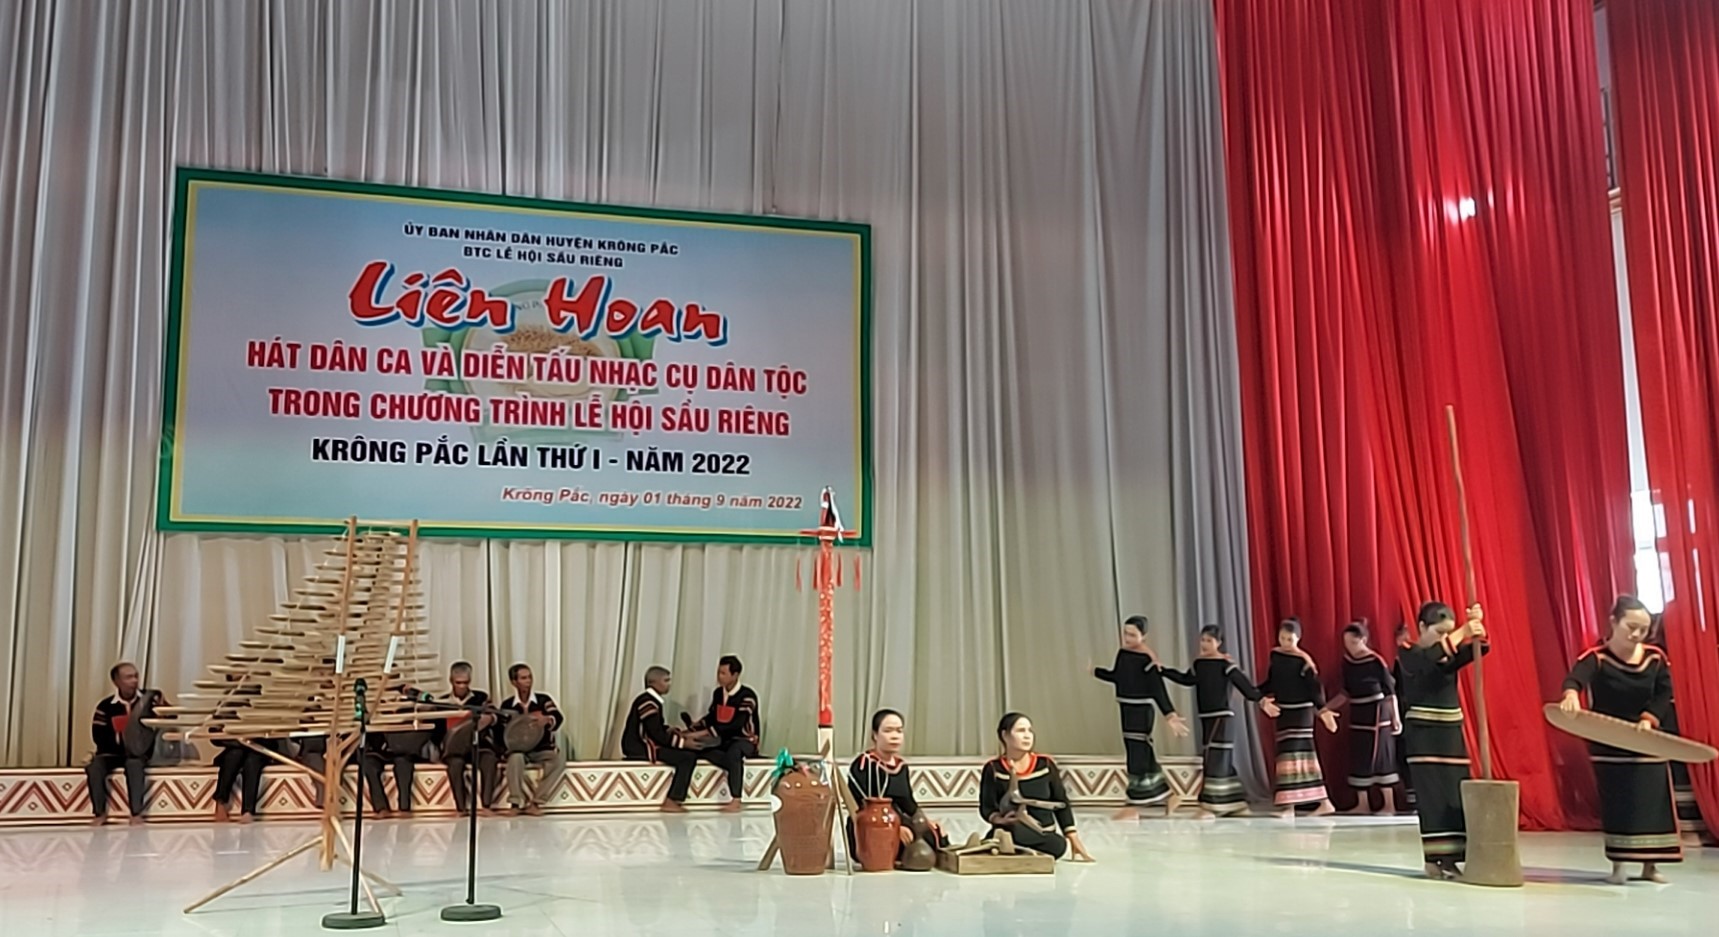 The opening ceremony of the Festival of folk songs and performances of ethnic musical instruments in the program of the 1st Krong Pac Durian Festival 2022